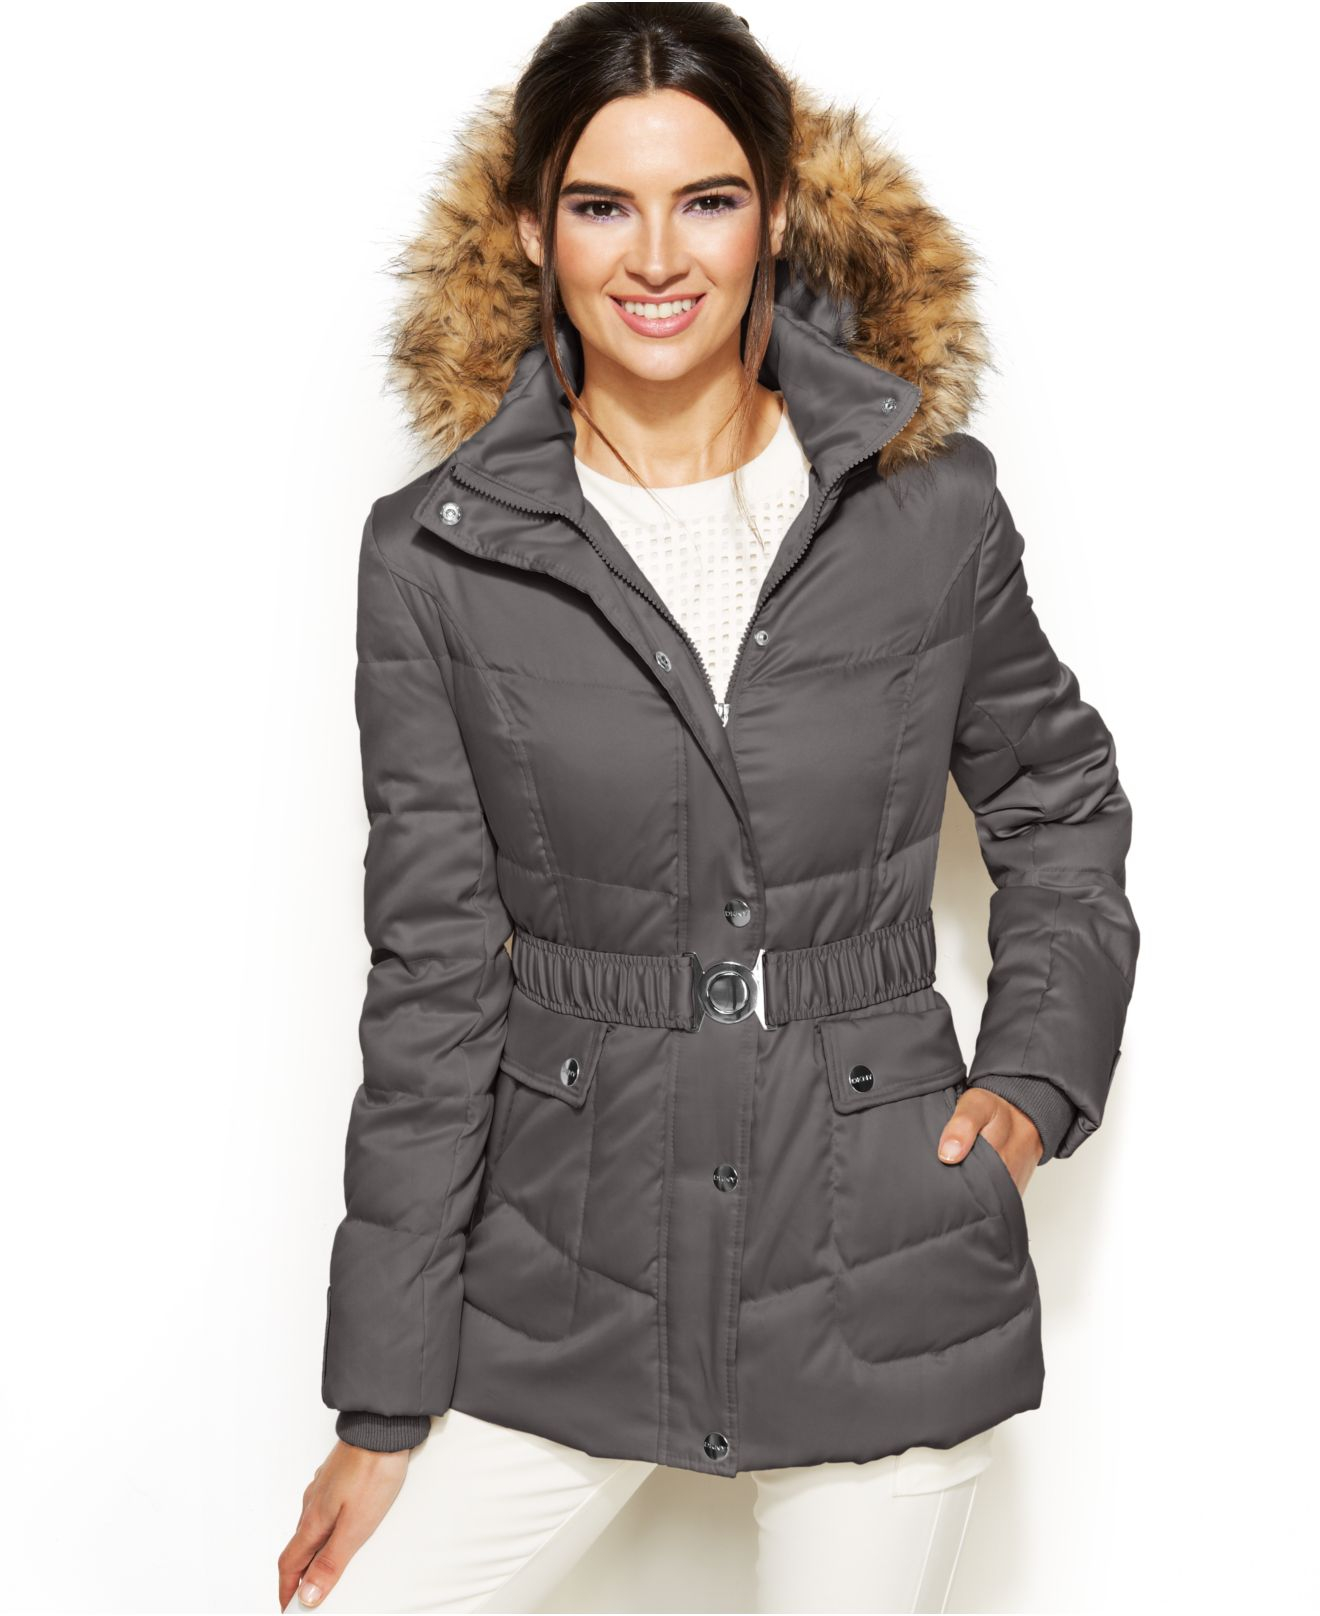 Lyst - Dkny Hooded Faux-Fur-Trim Belted Down Puffer Coat in Gray